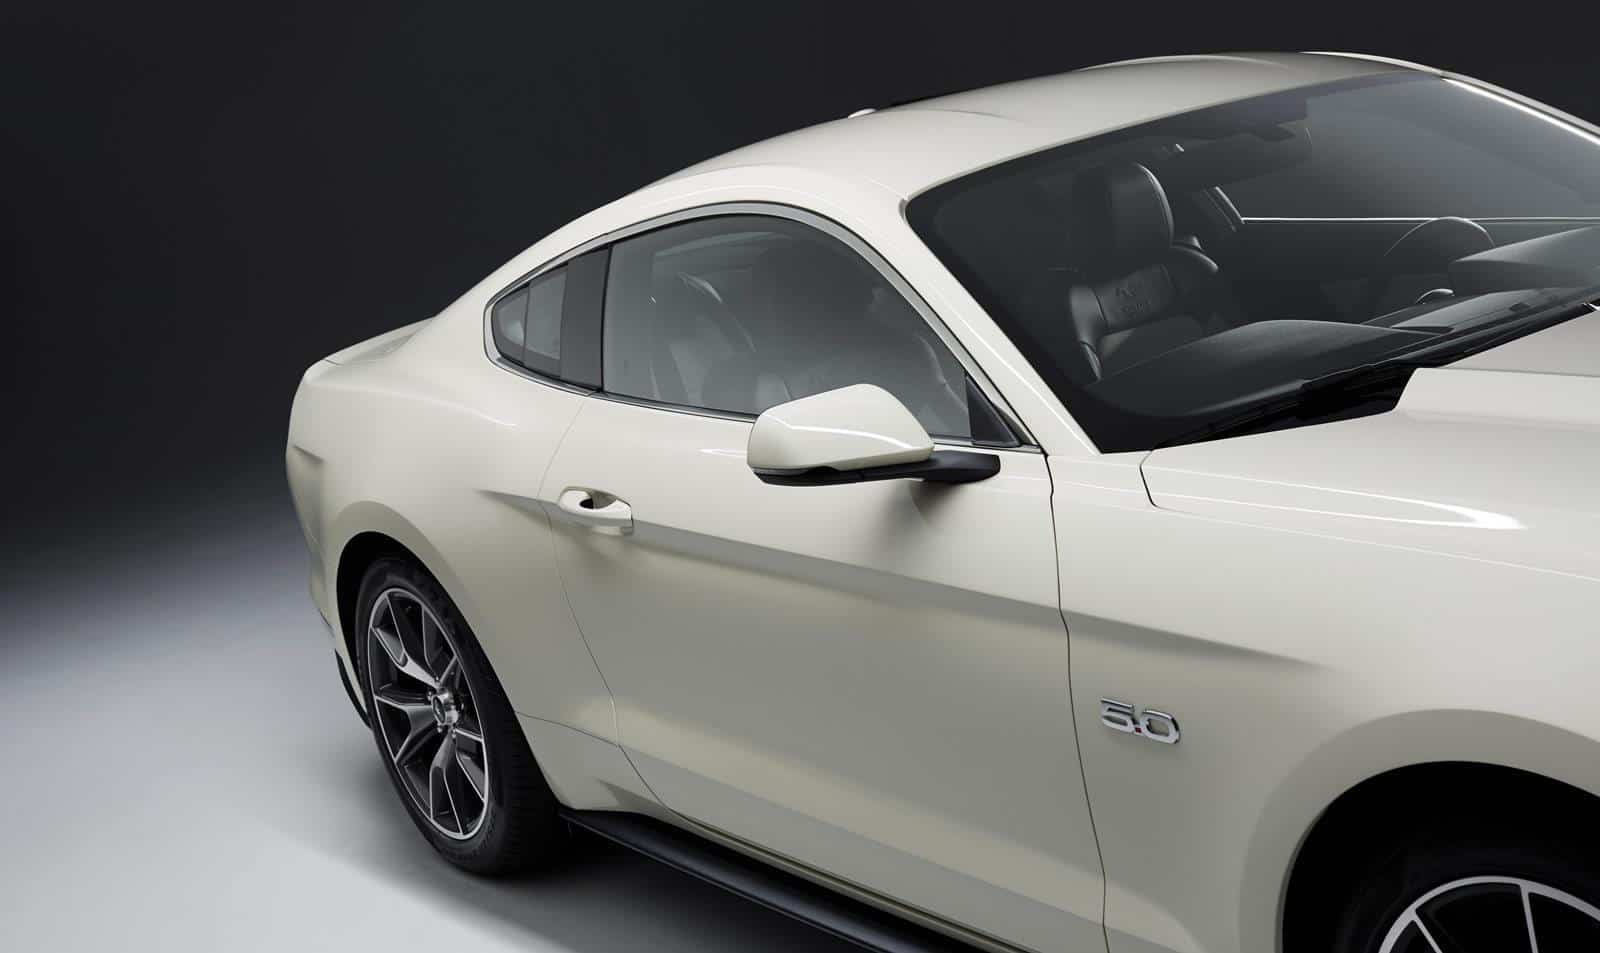 Ford-Mustang-50th-Anniversary-Limited-Edition 16